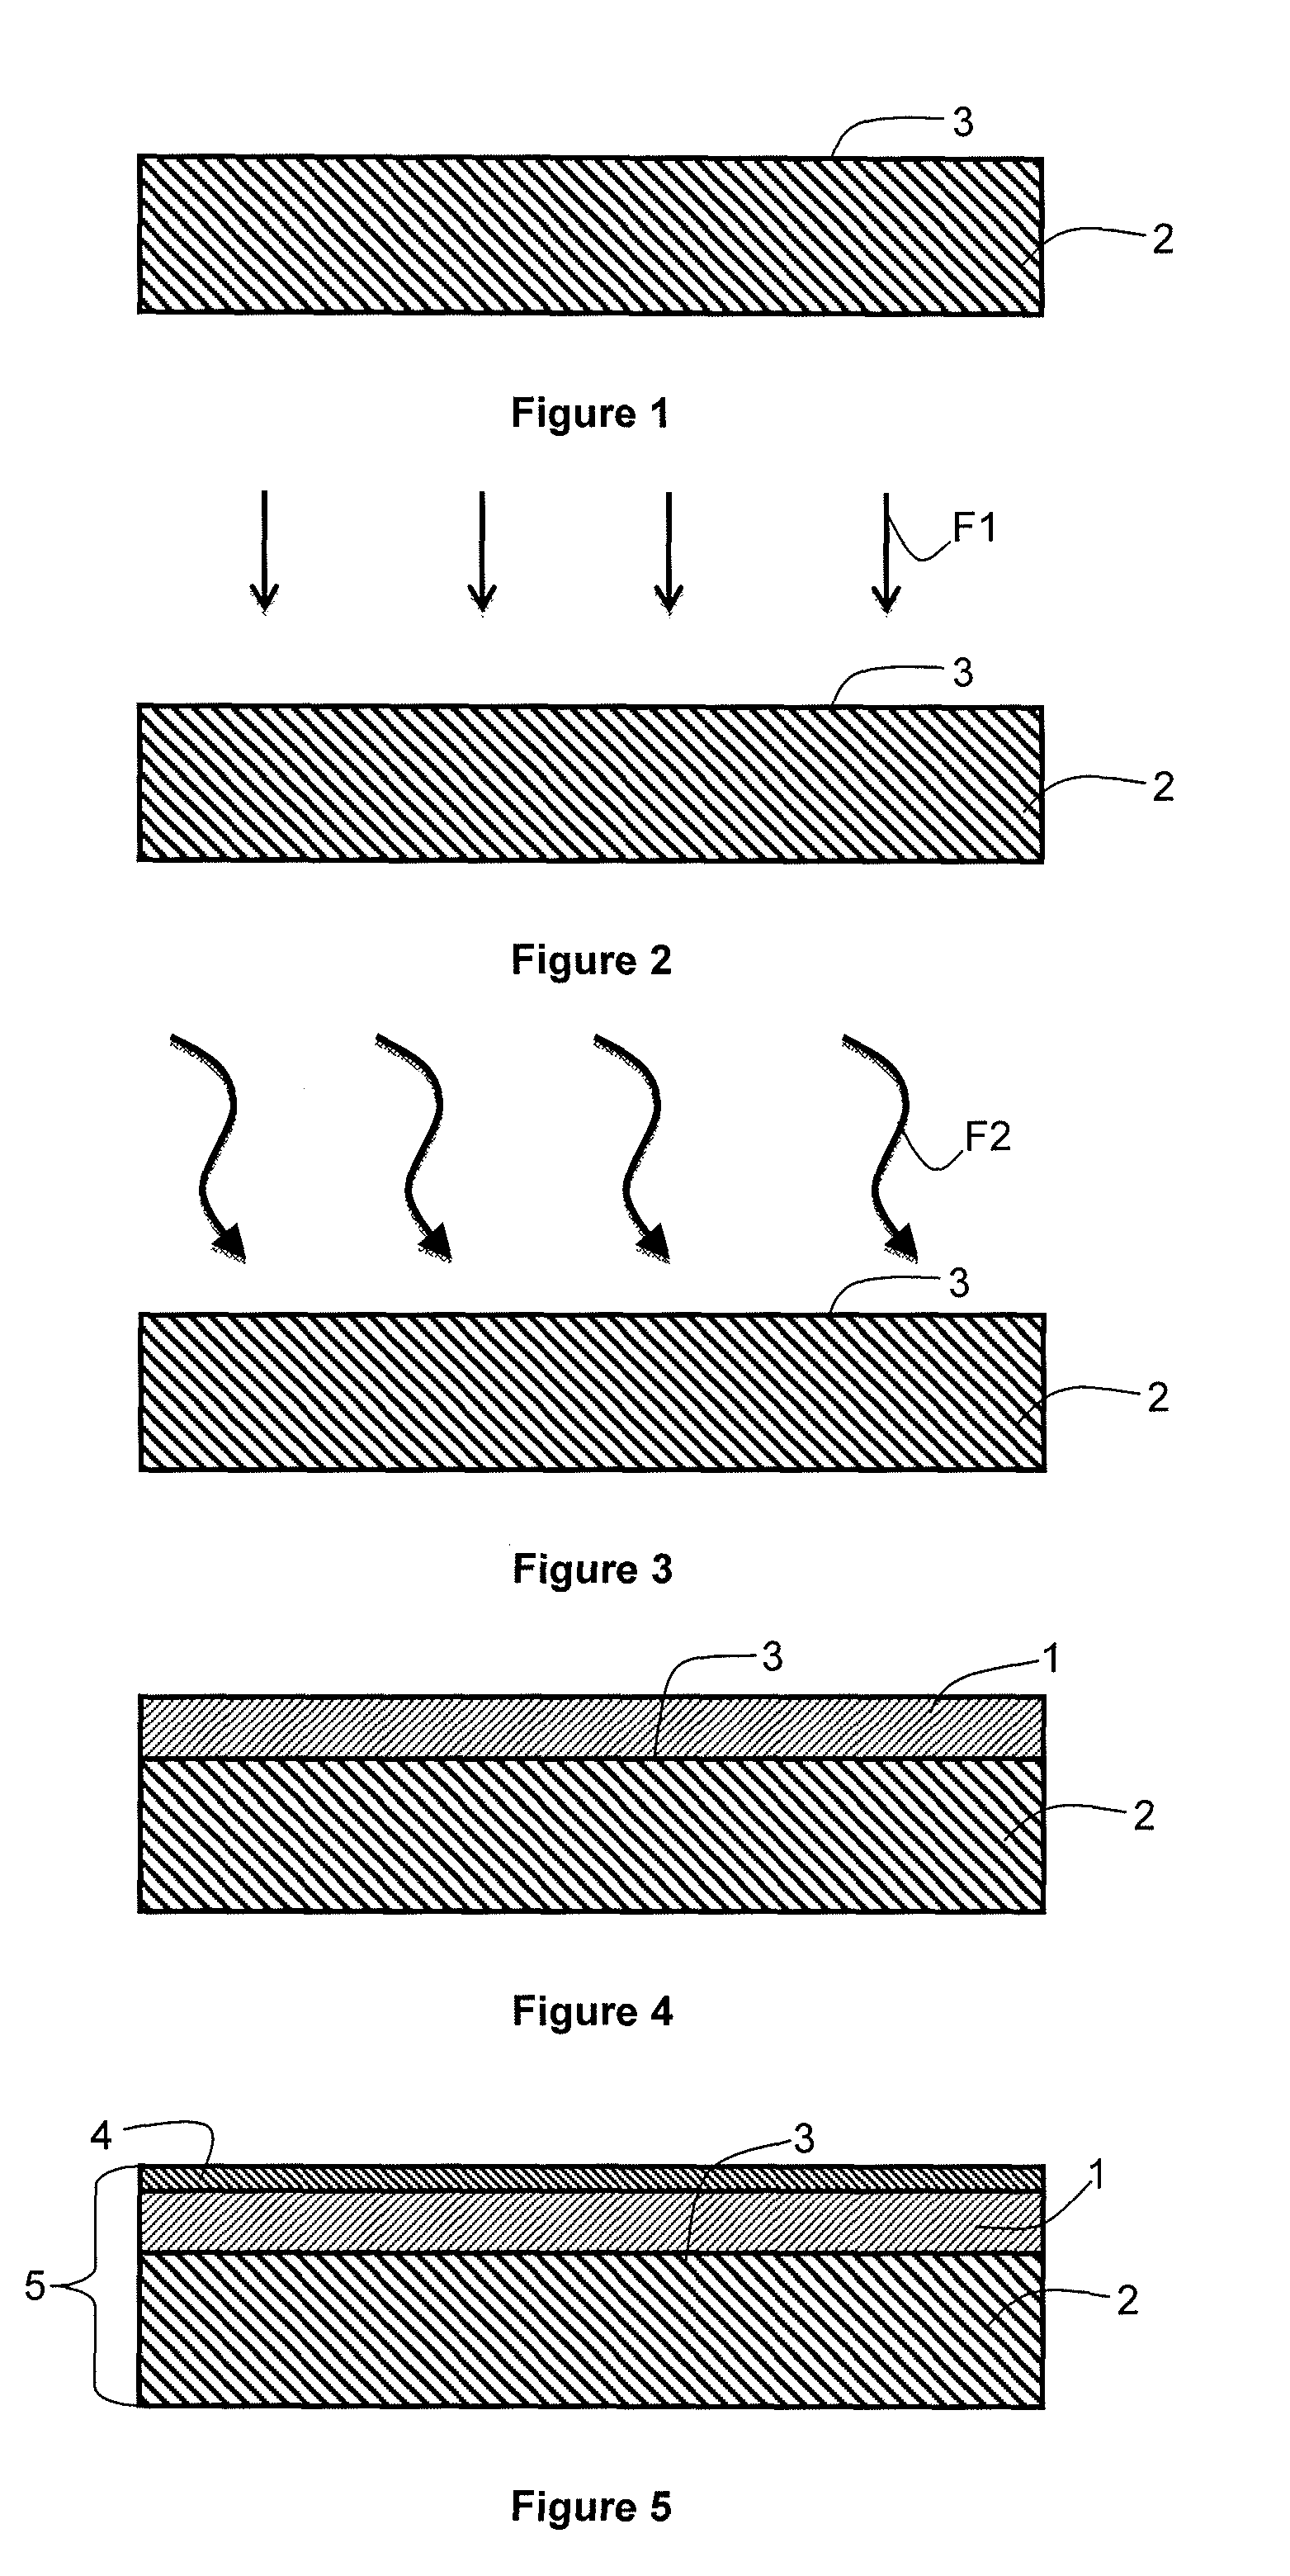 Process for producing an element for absorbing solar radiation for a thermal concentrating solar power plant